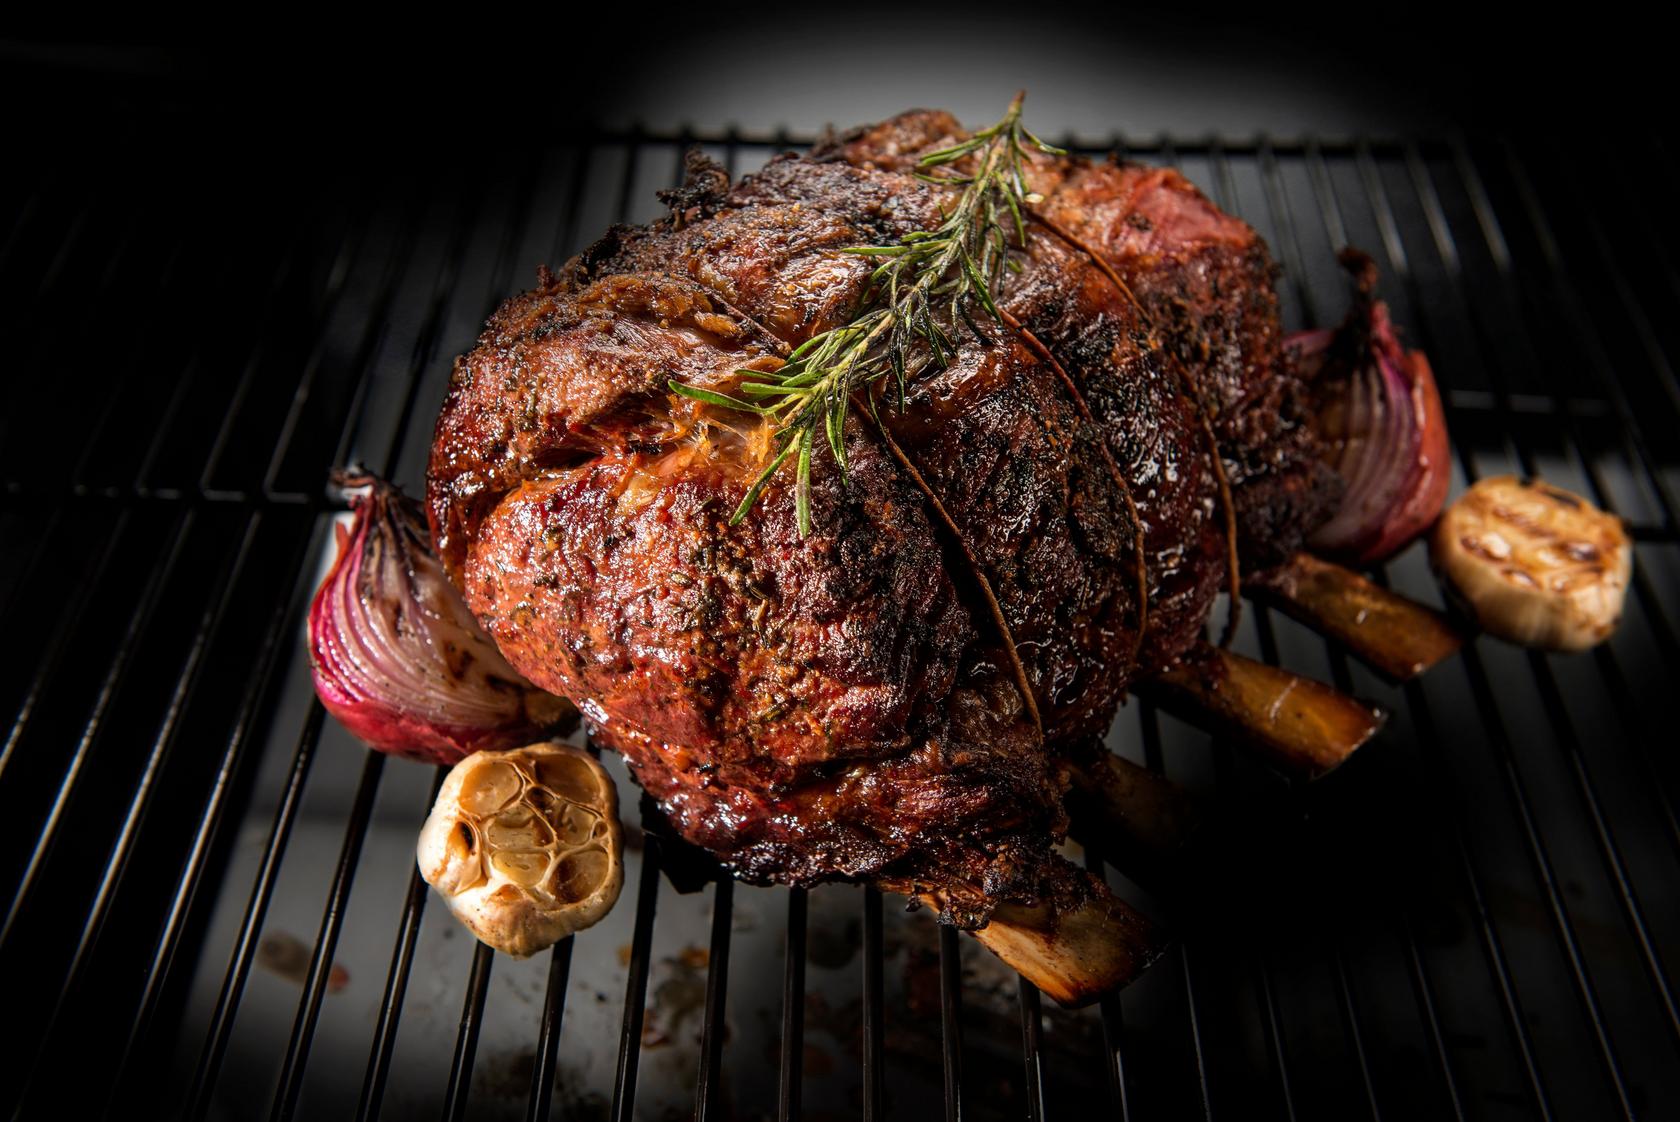 How To Cook A Standing Rib Roast & Serve Like A Pro